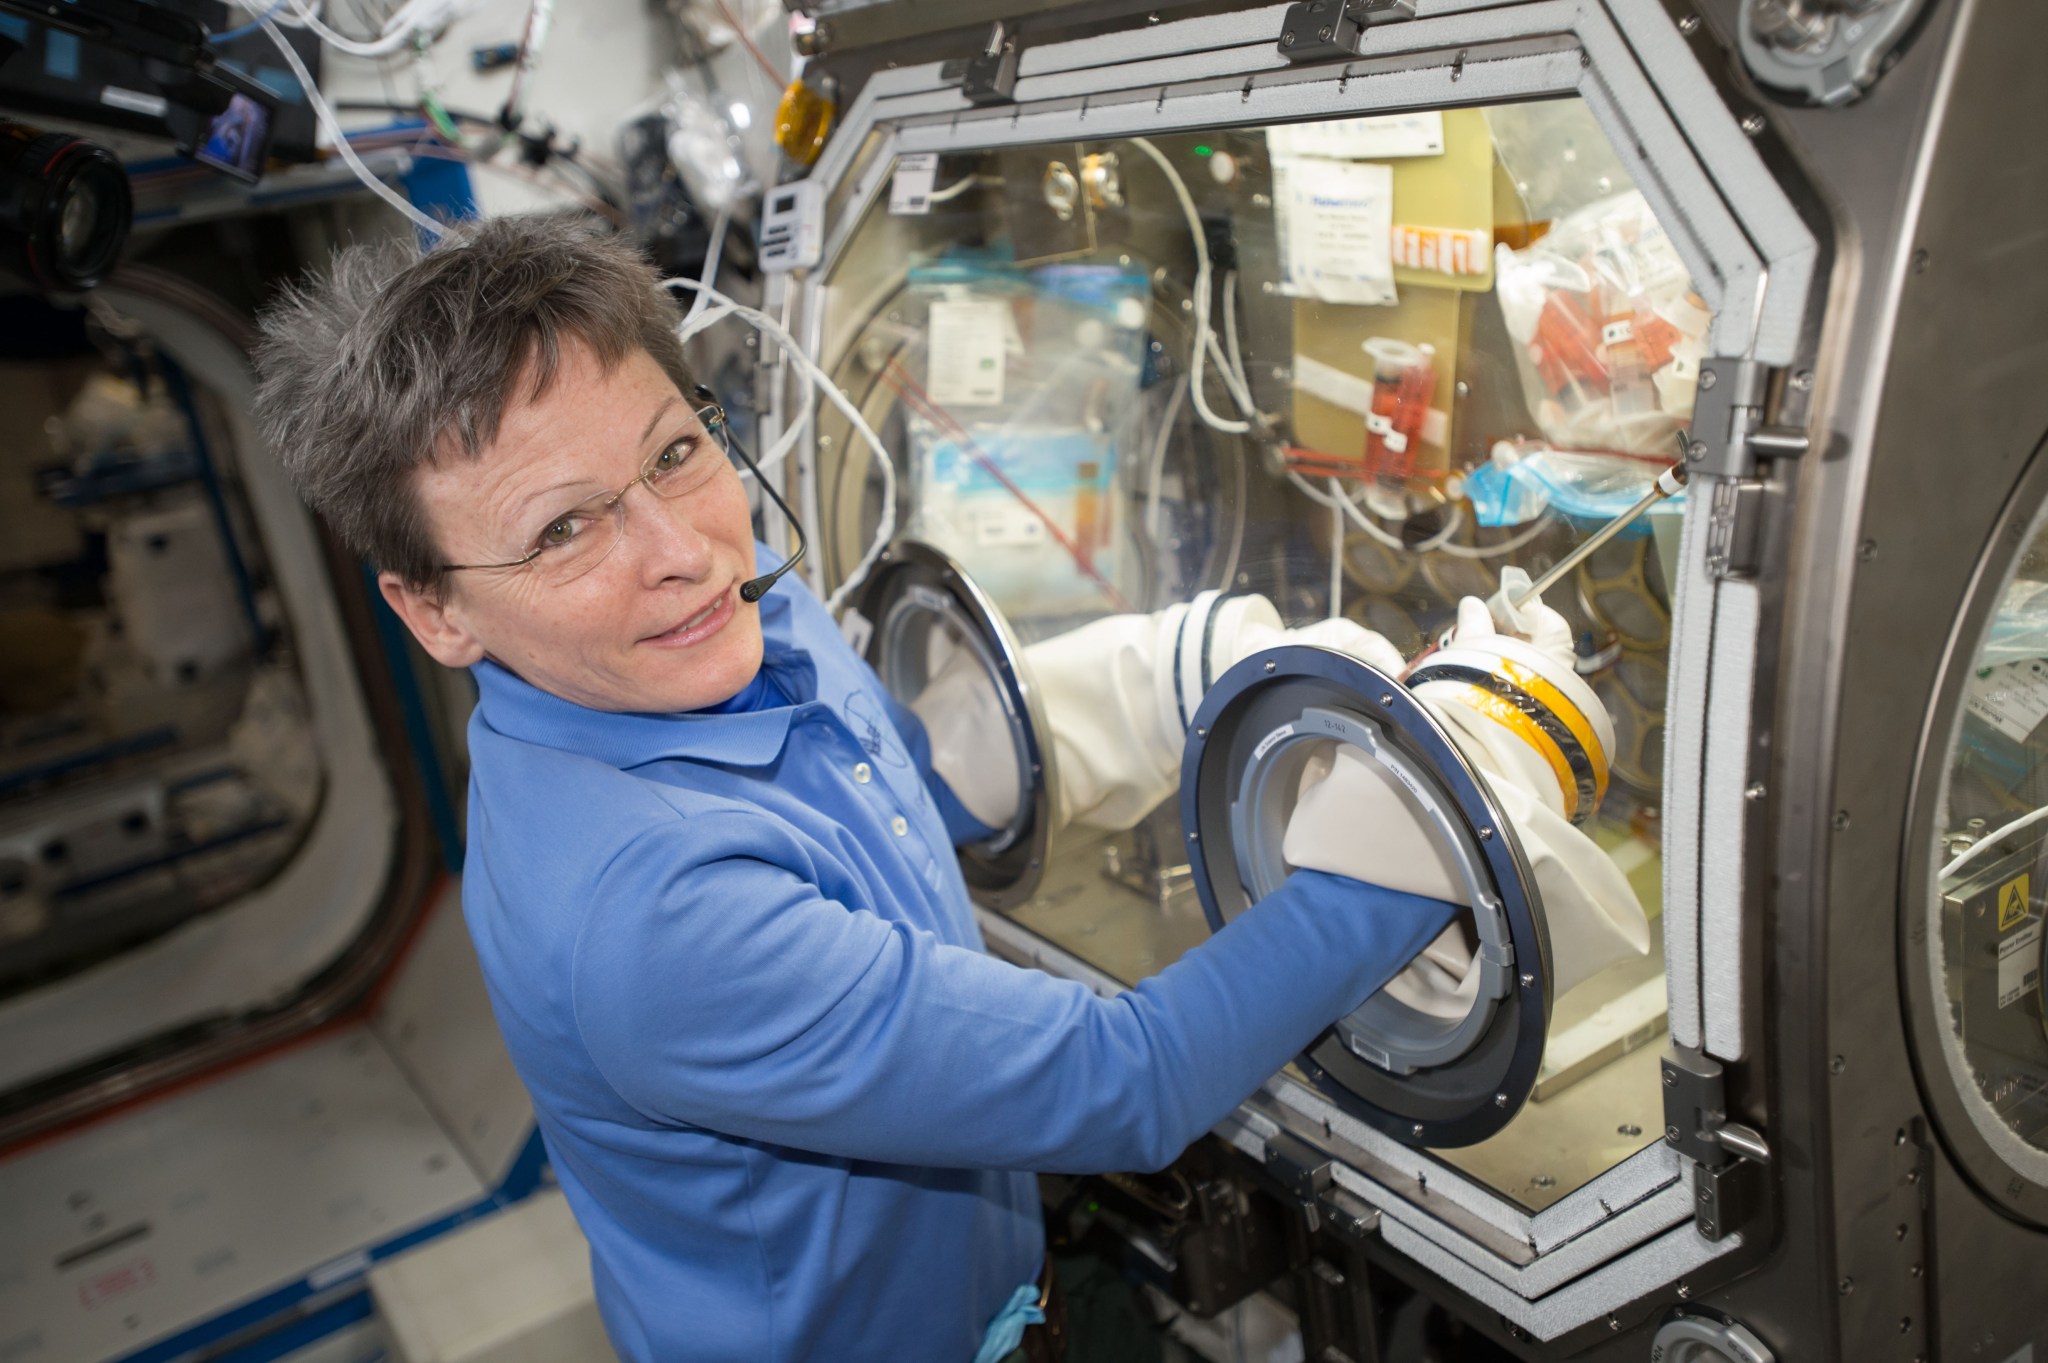 NASA astronaut Peggy Whitson works with the OsteoOmics investigation on the International Space Station.